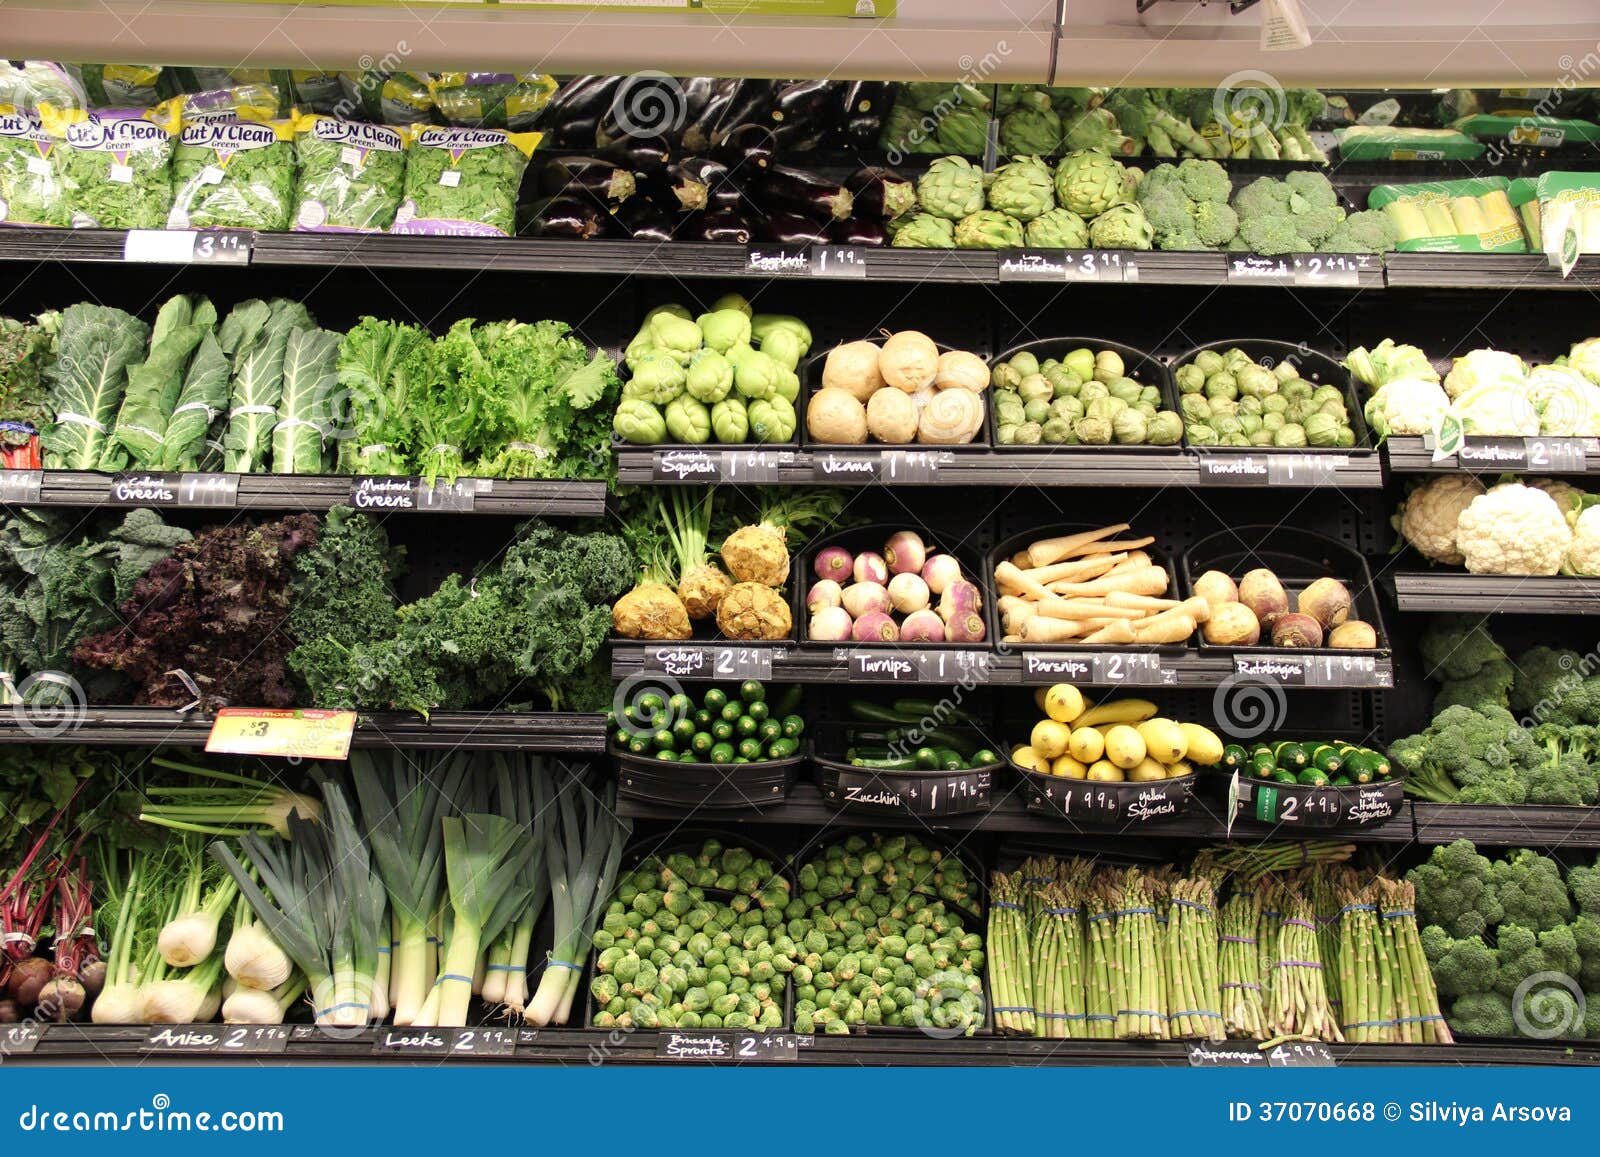 green-vegetables-section-grocery-store-37070668.jpg